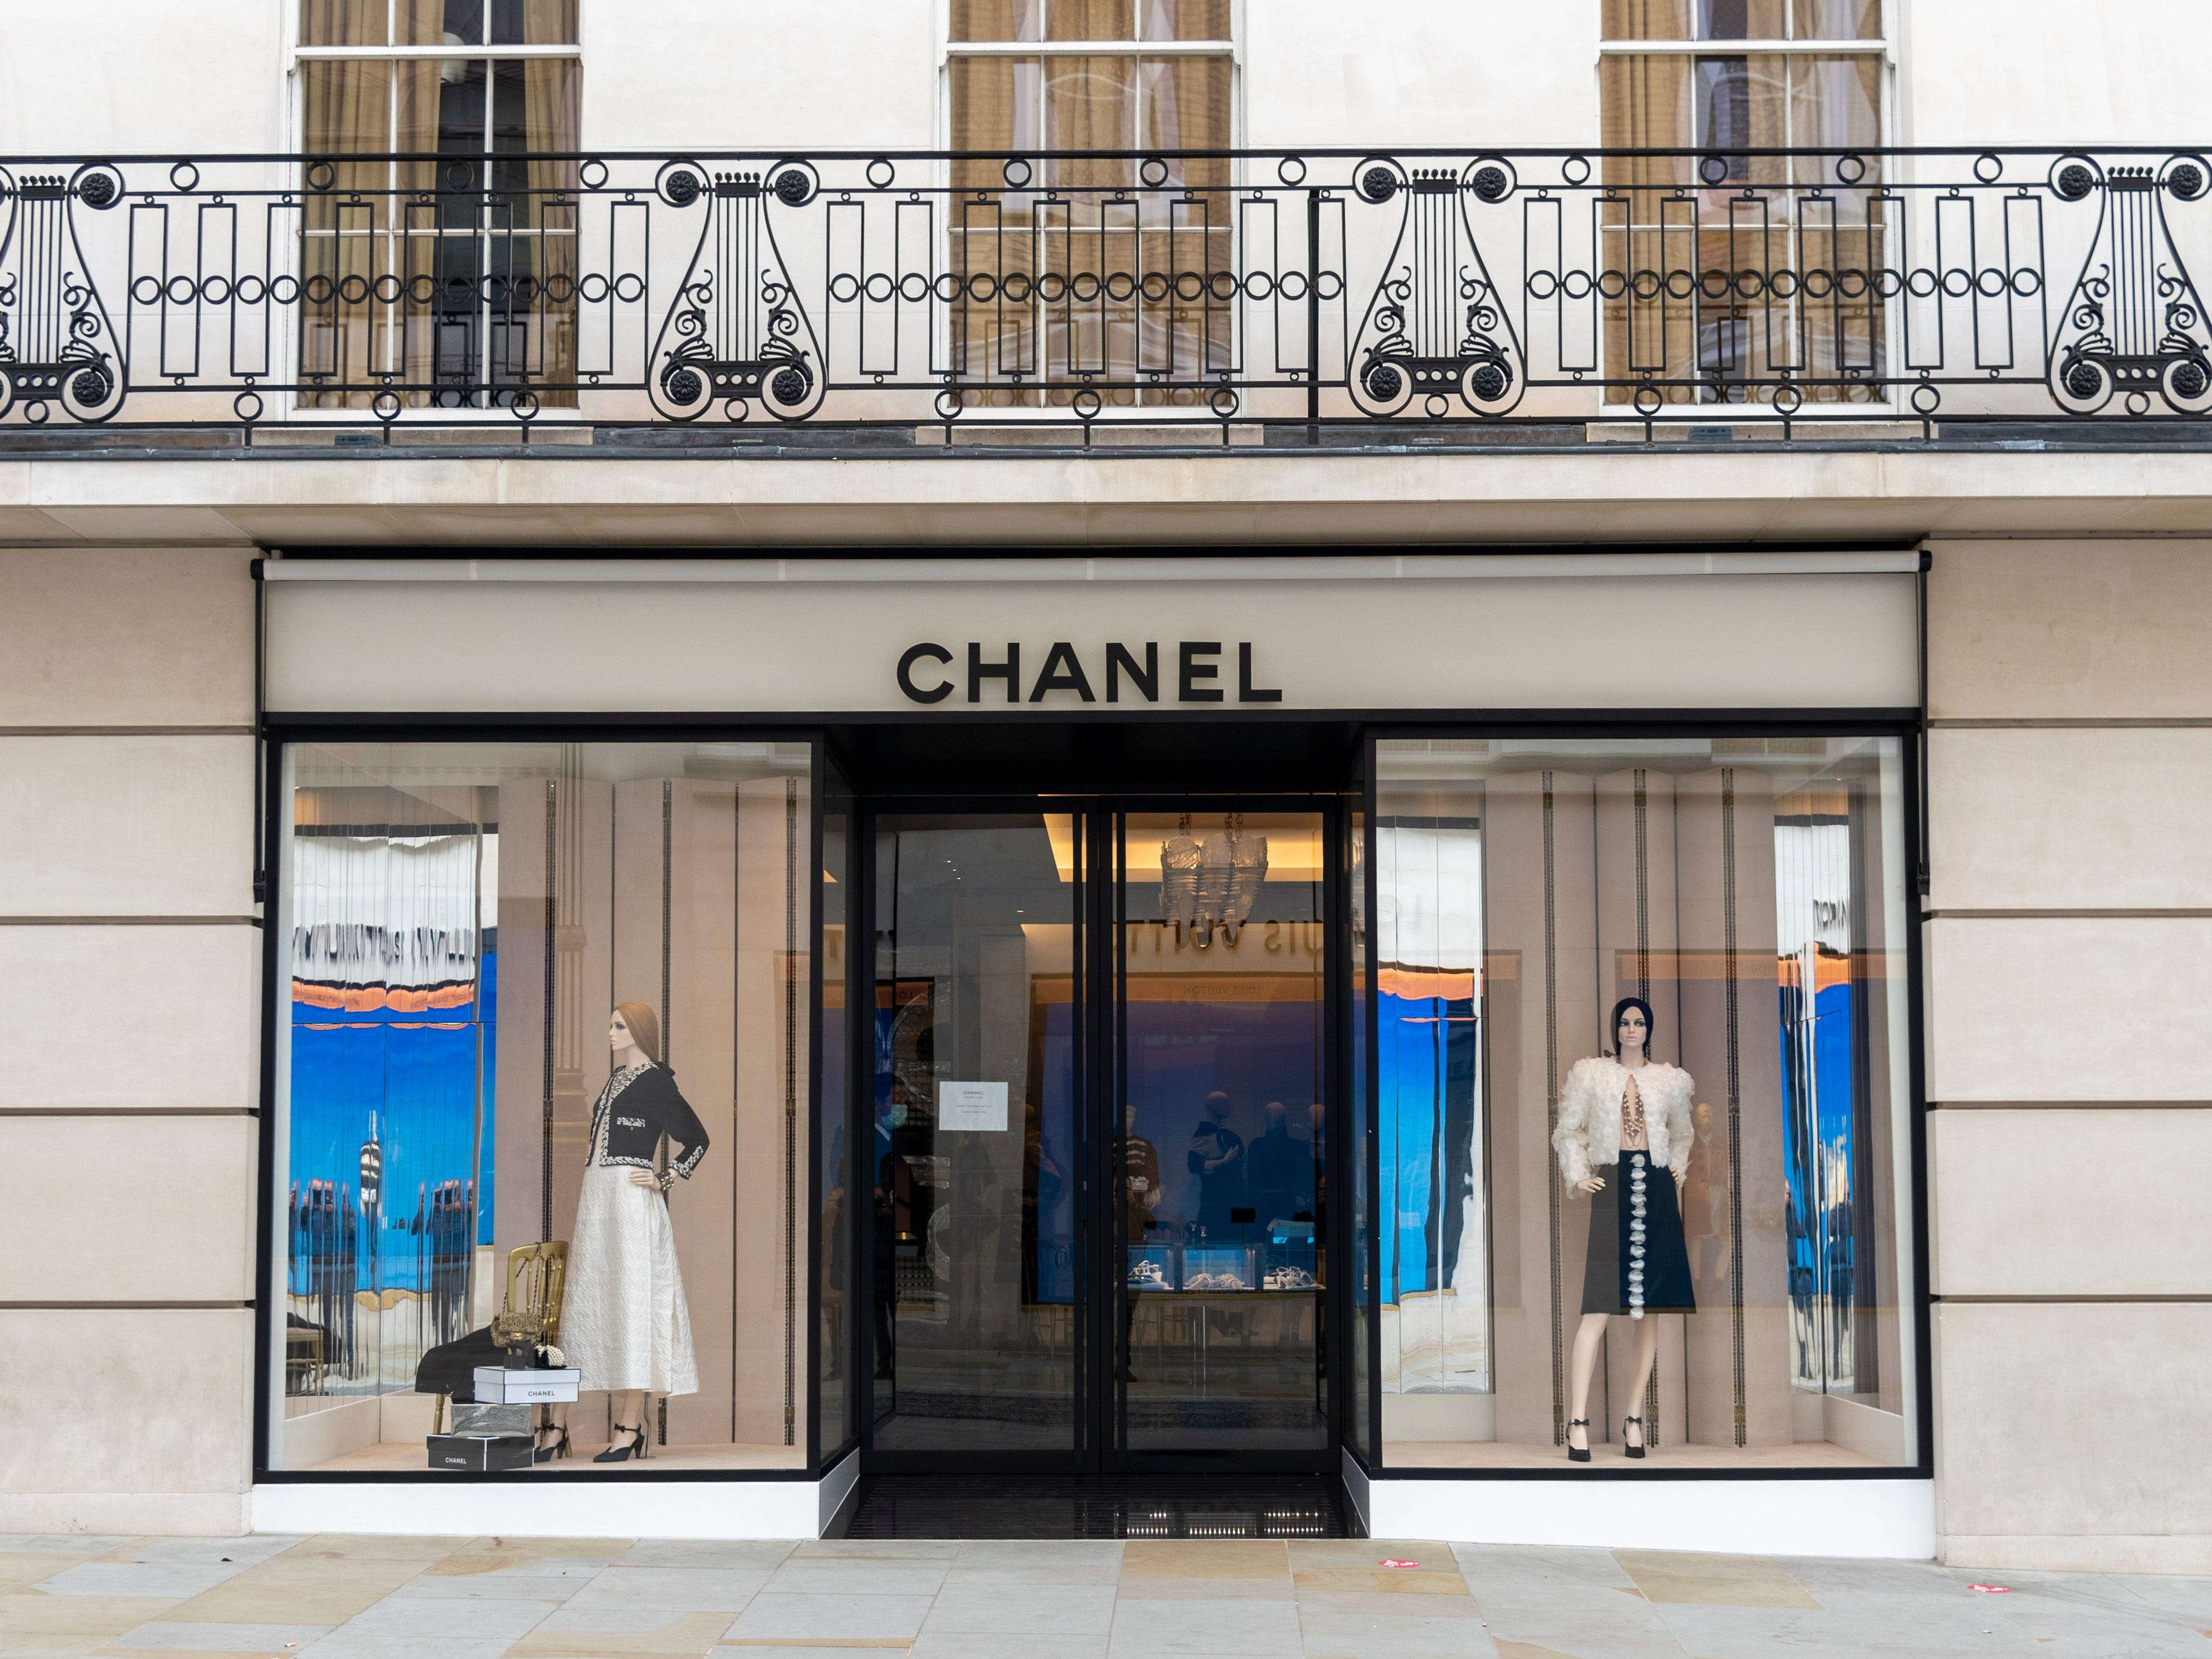 Chanel's flagship London store could sell for more than $315 million - Business Insider